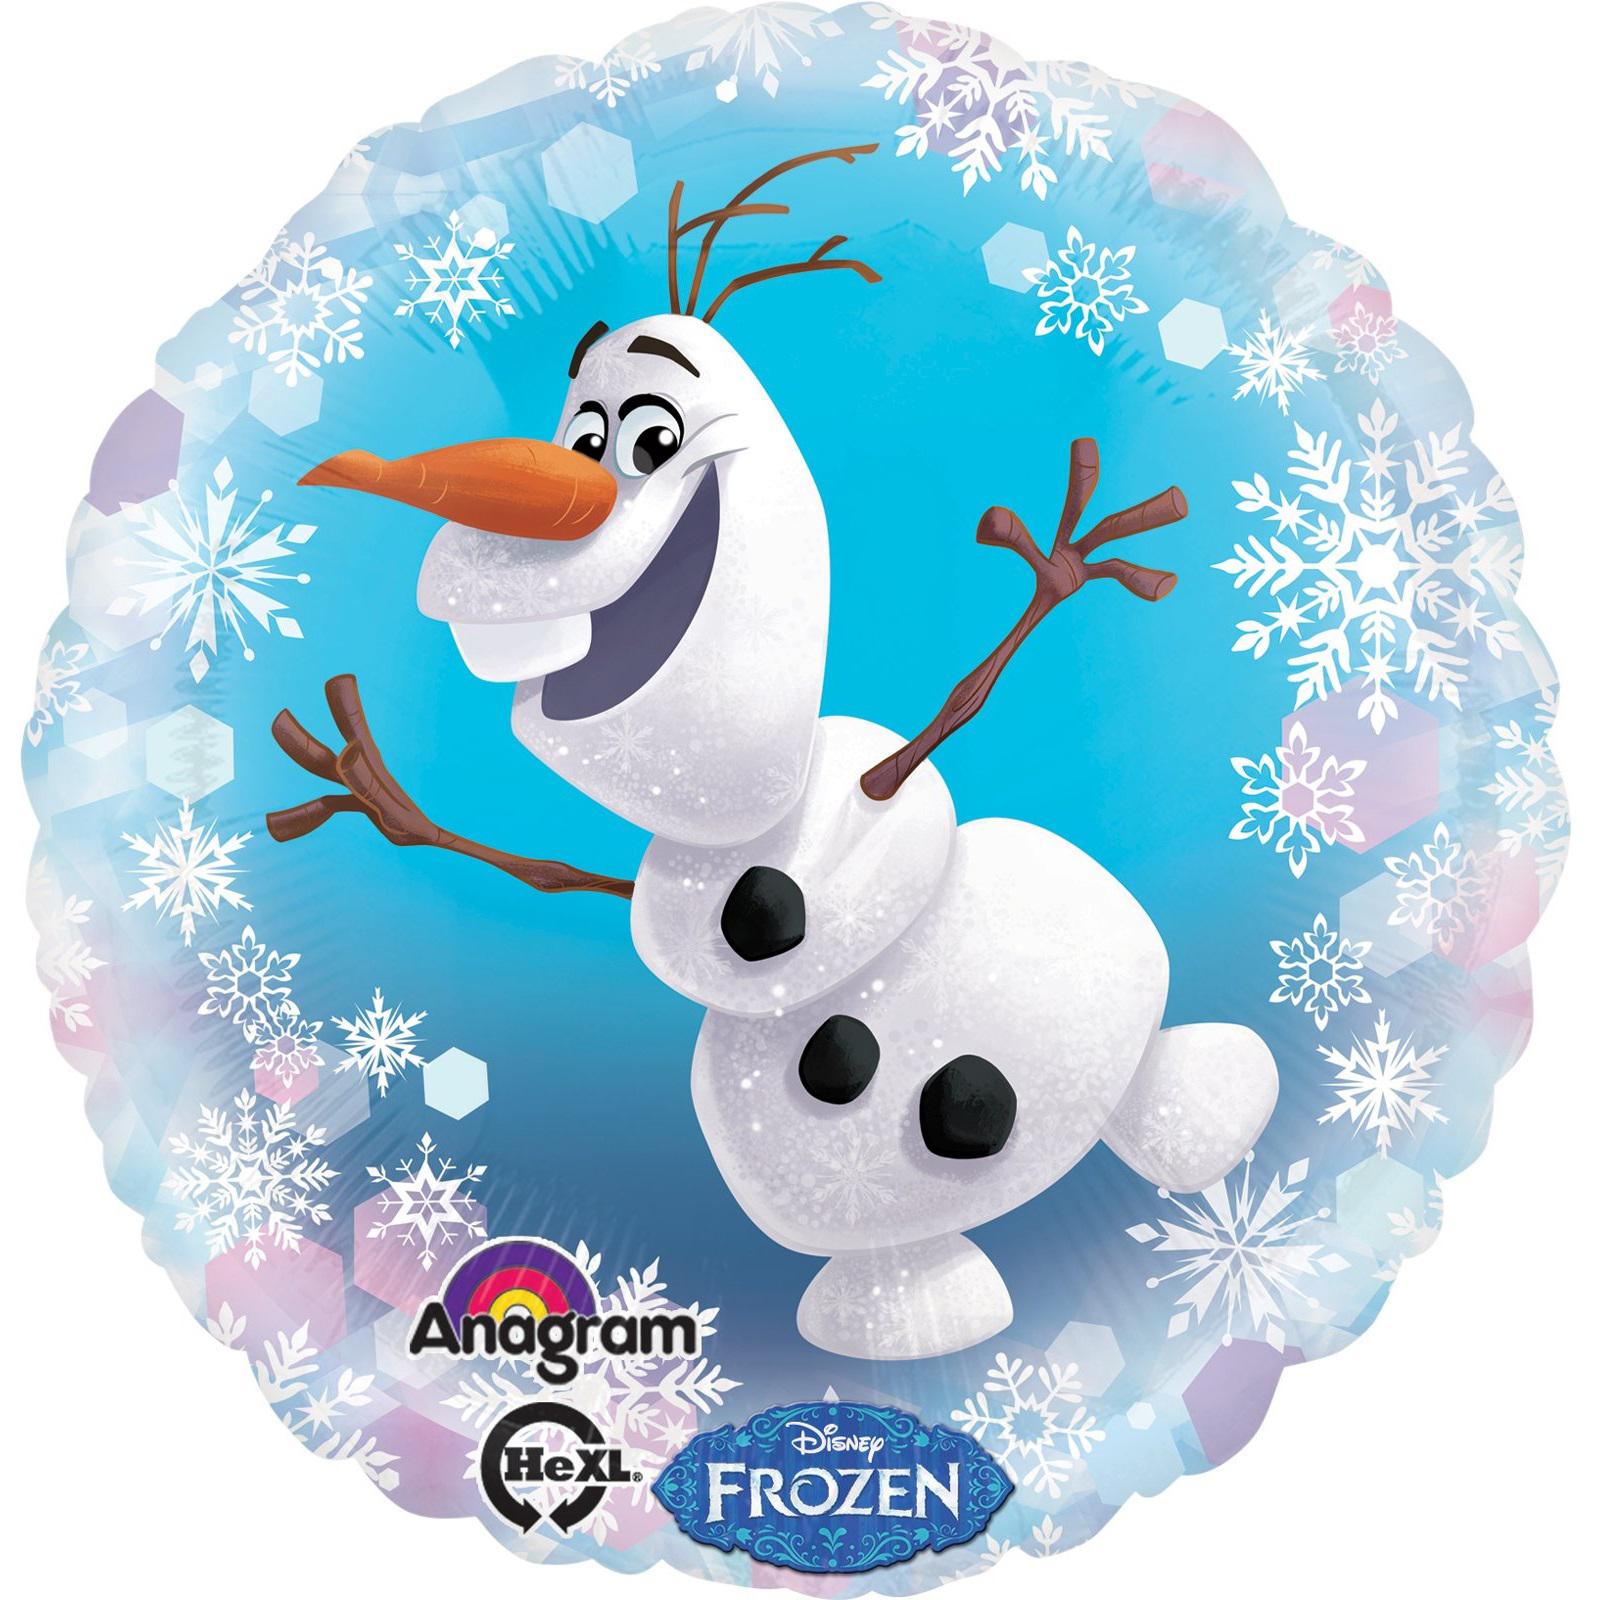 Disney Frozen Olaf Foil Balloon 18in Balloons & Streamers - Party Centre